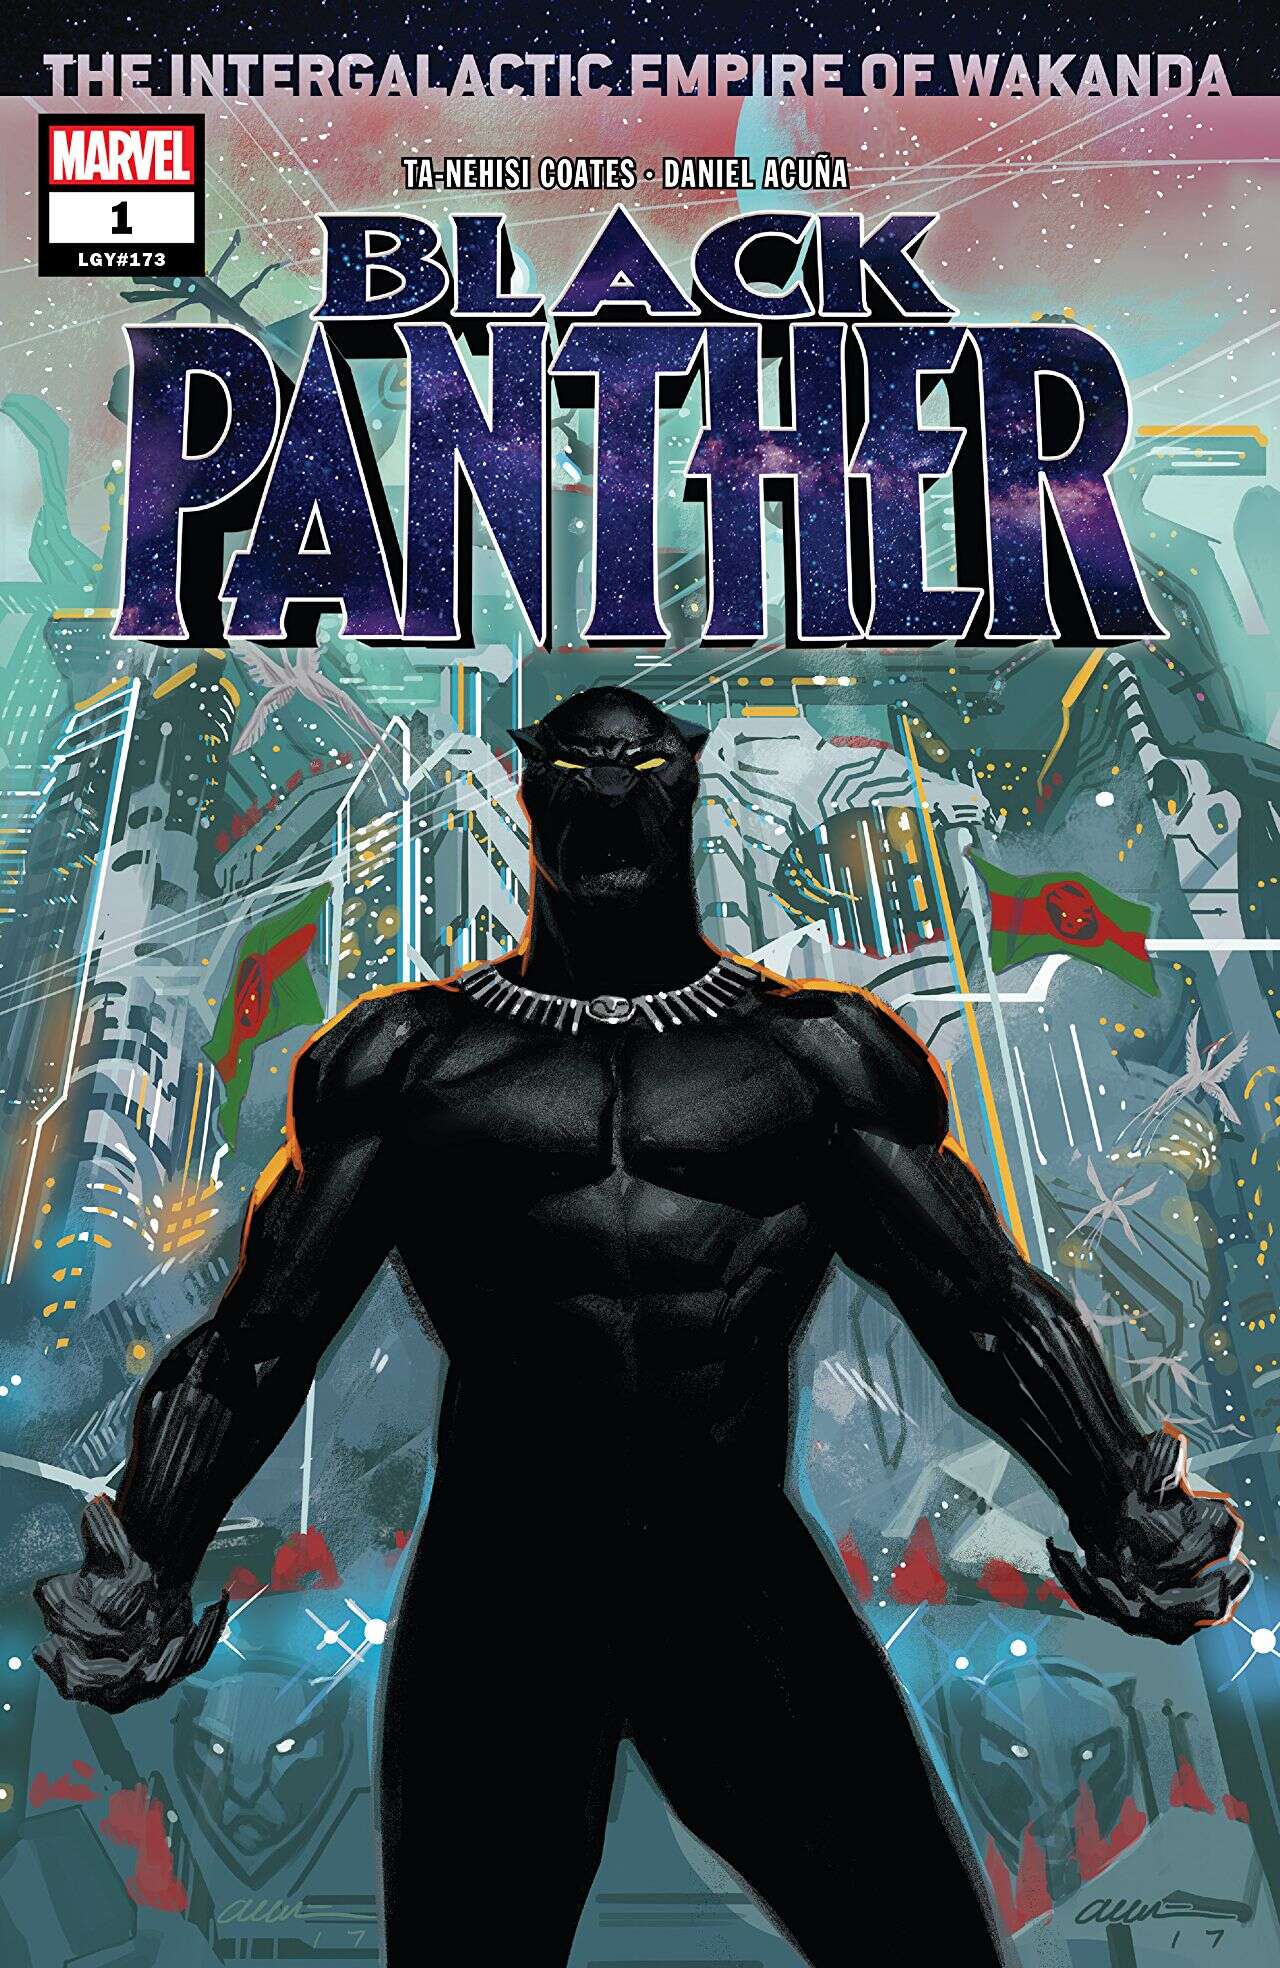 Black Panther cover